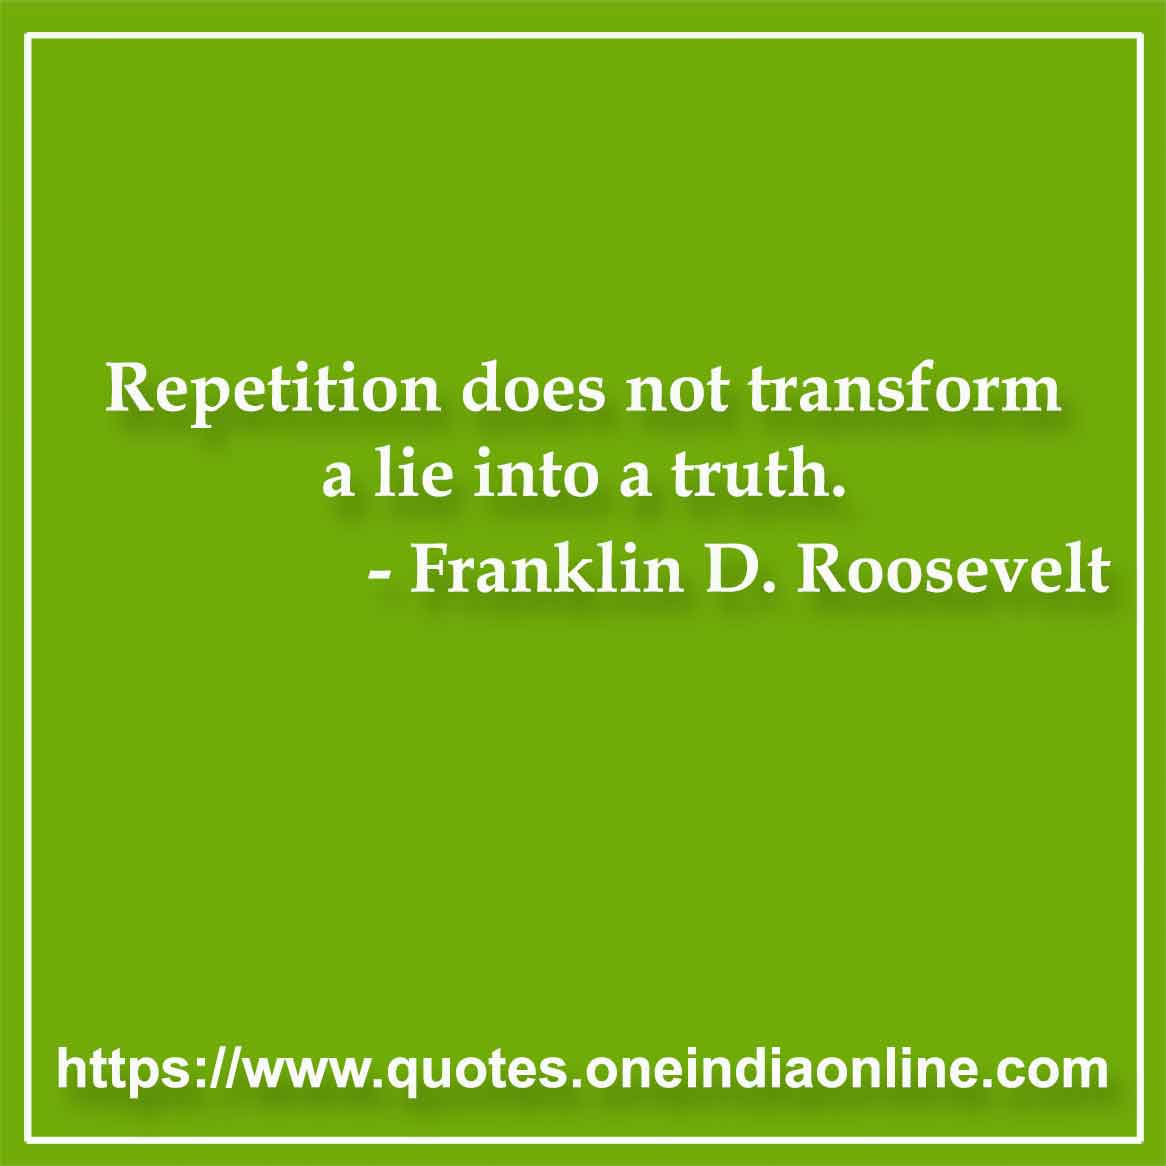 Repetition does not transform a lie into a truth.

- Lies Quotes by Franklin D. Roosevelt 